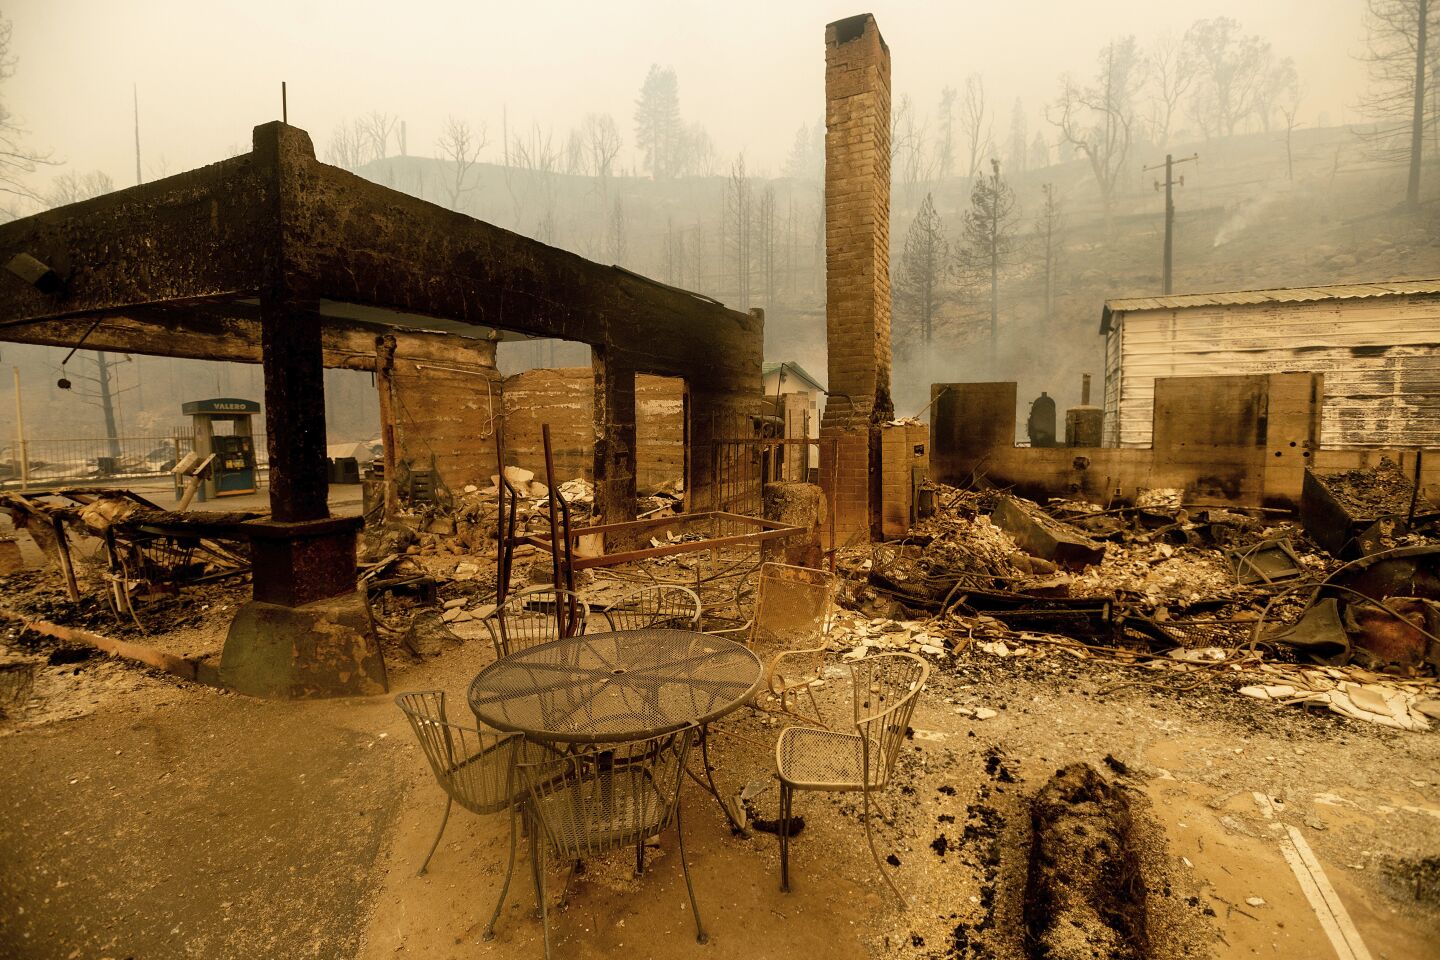 A table stands outside the destroyed Cressman's General Store after the Creek Fire burned through Fresno County.